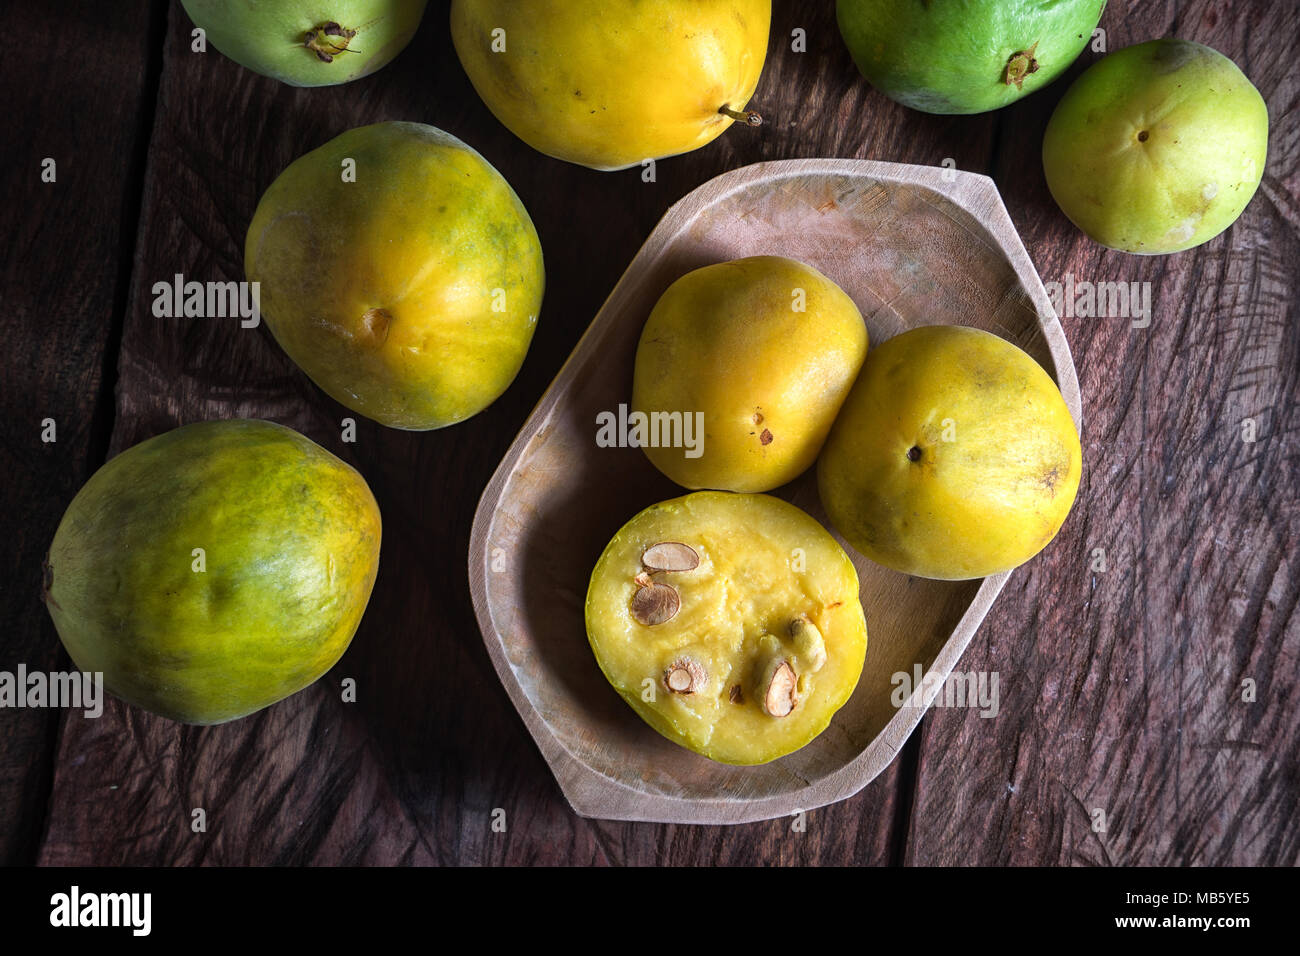 rare araza fruits in a wooden bowl on rustic background Stock Photo